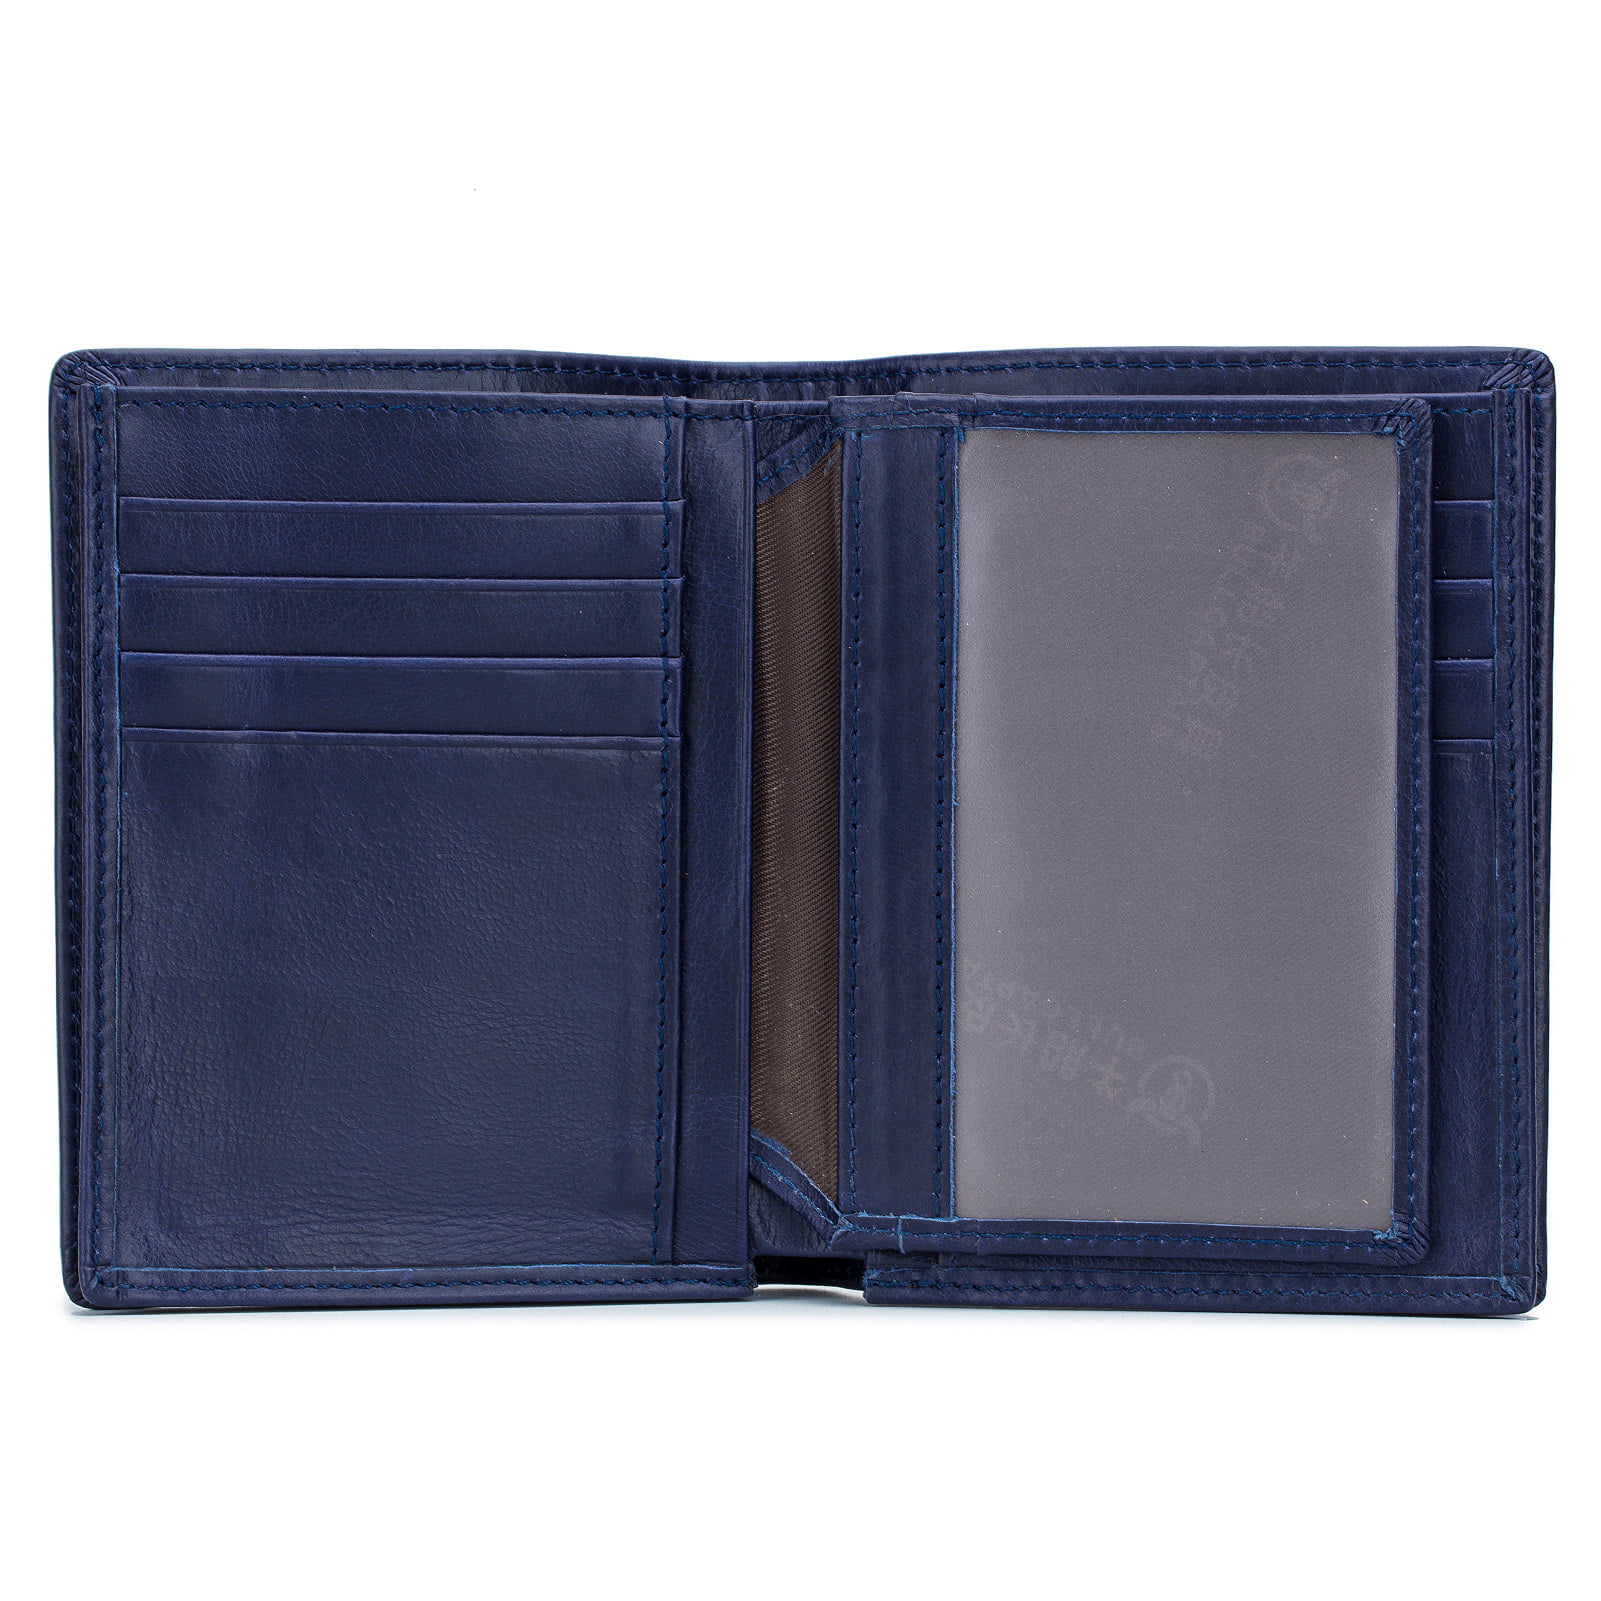 Fossil Neel Extra Capacity Trifold Wallet